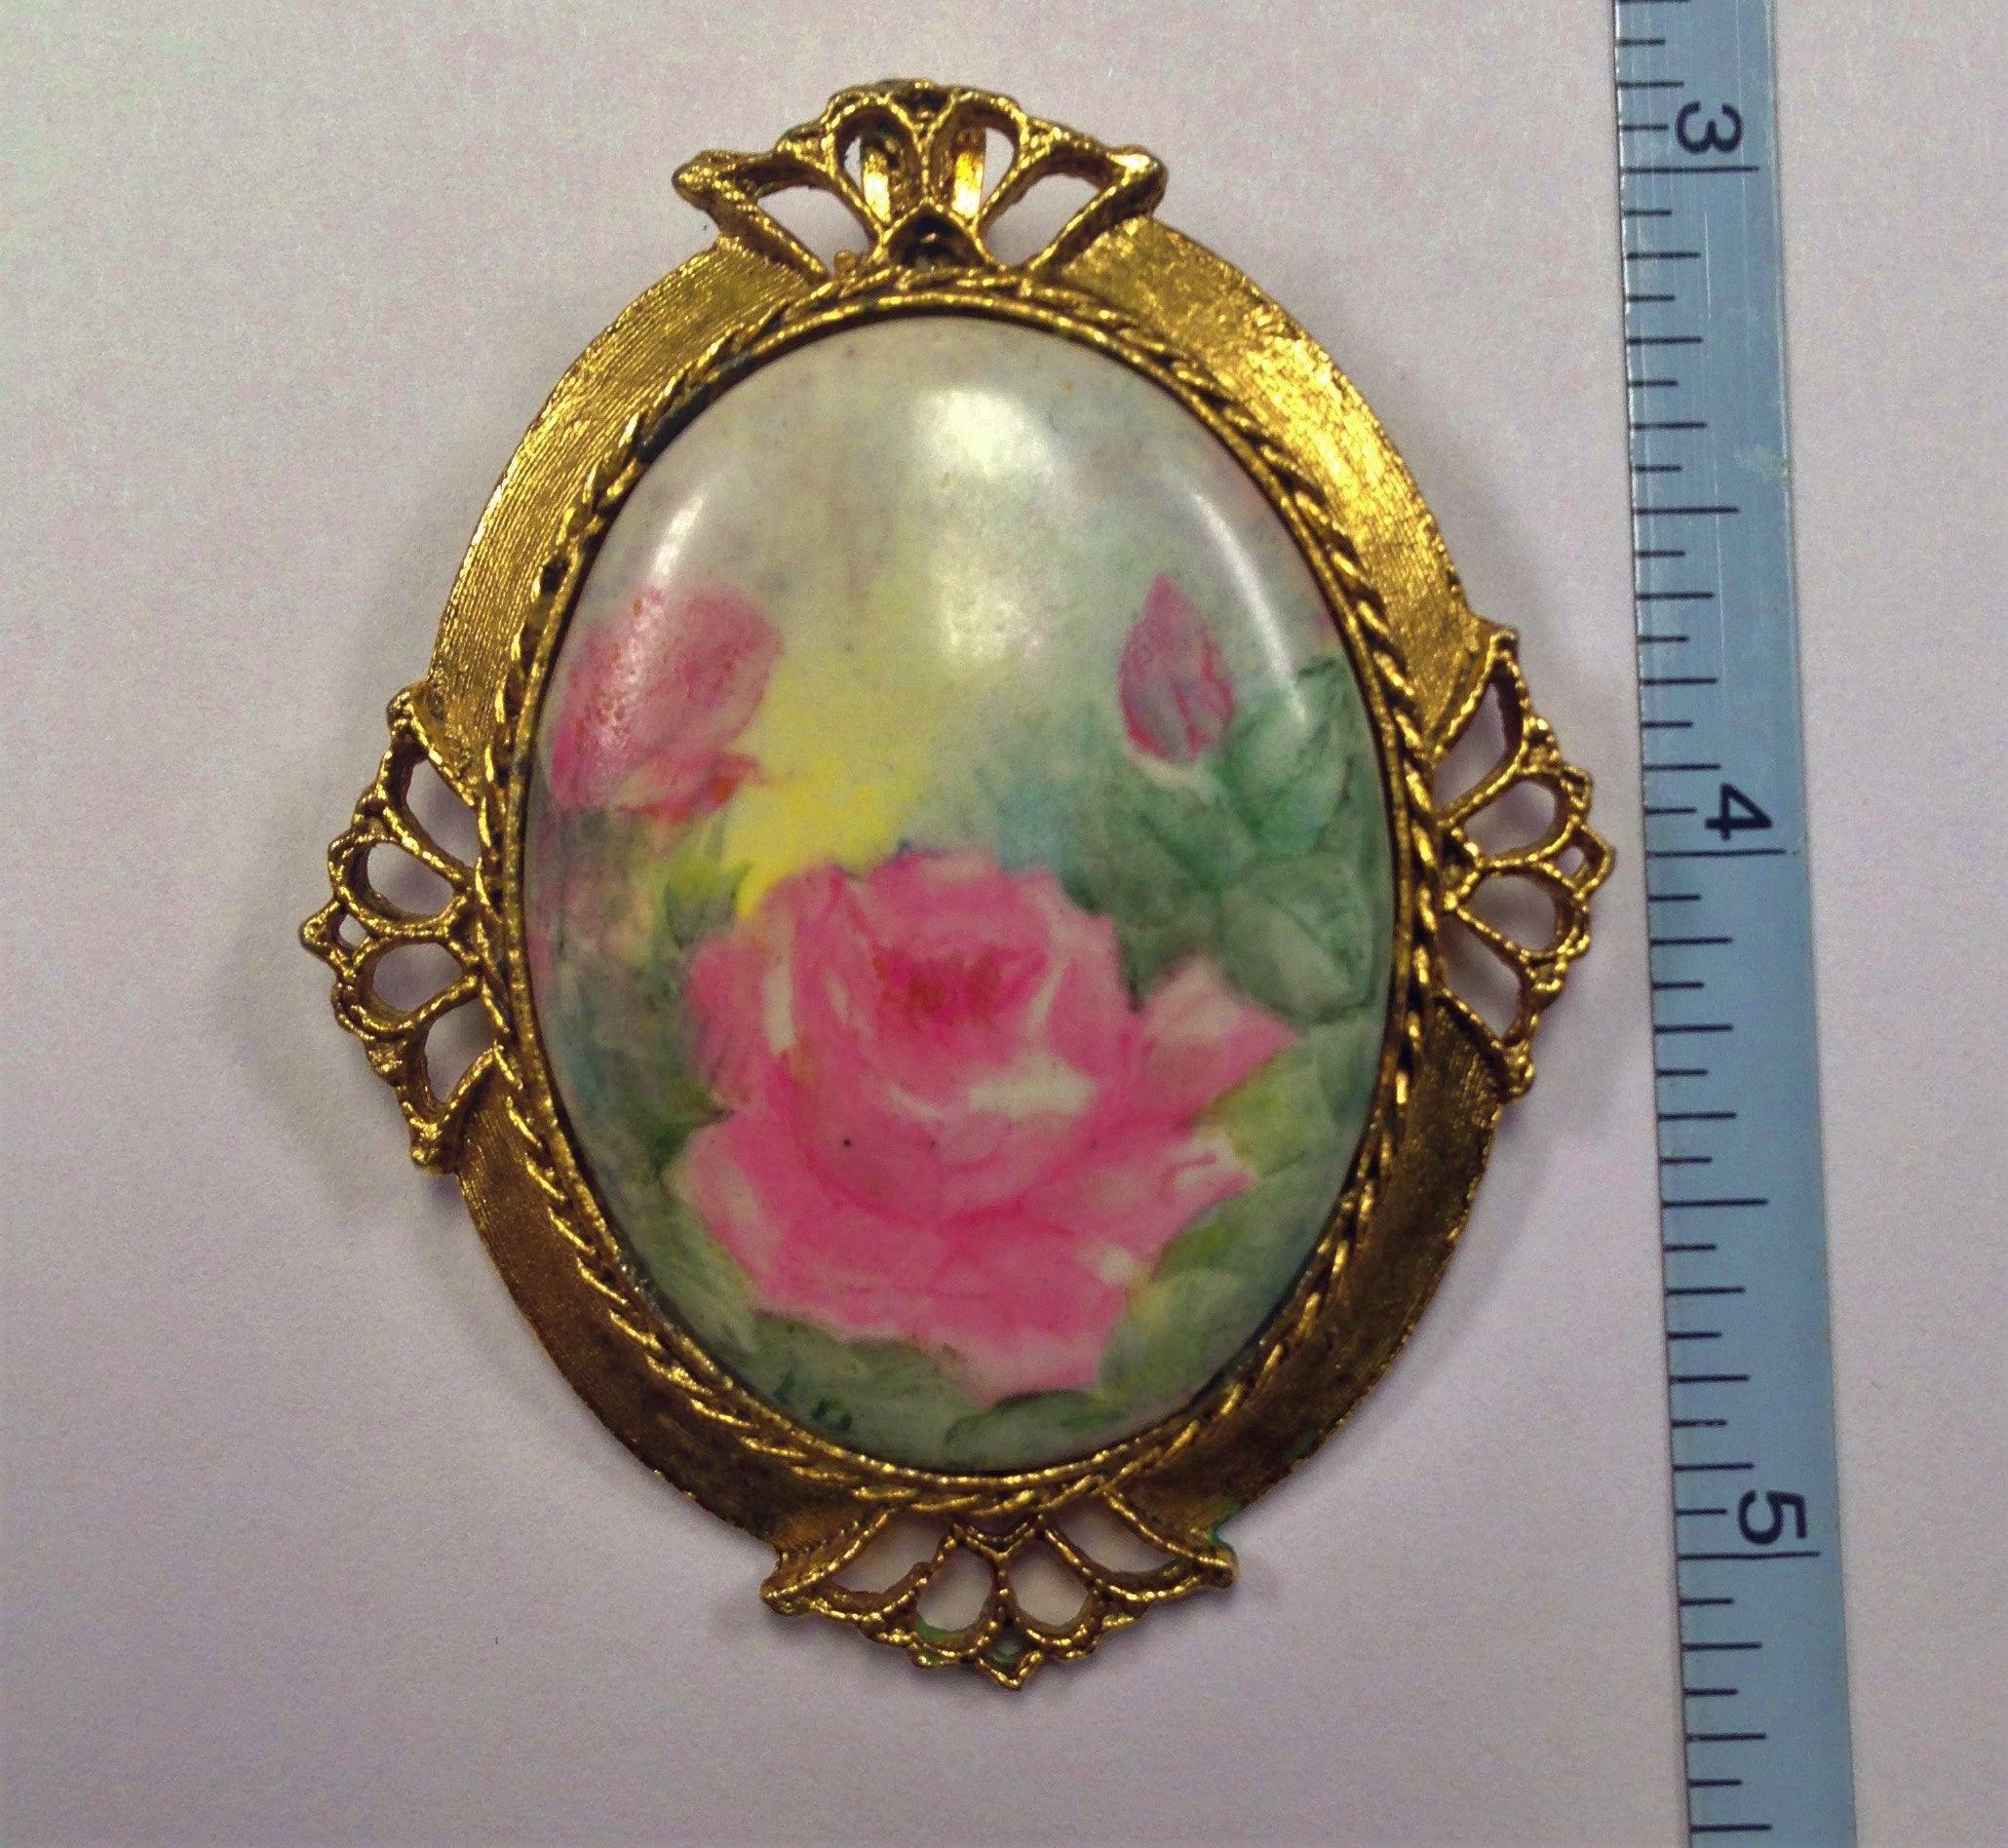 Porcelain Rose Brooch Pin - Hers and His Treasures